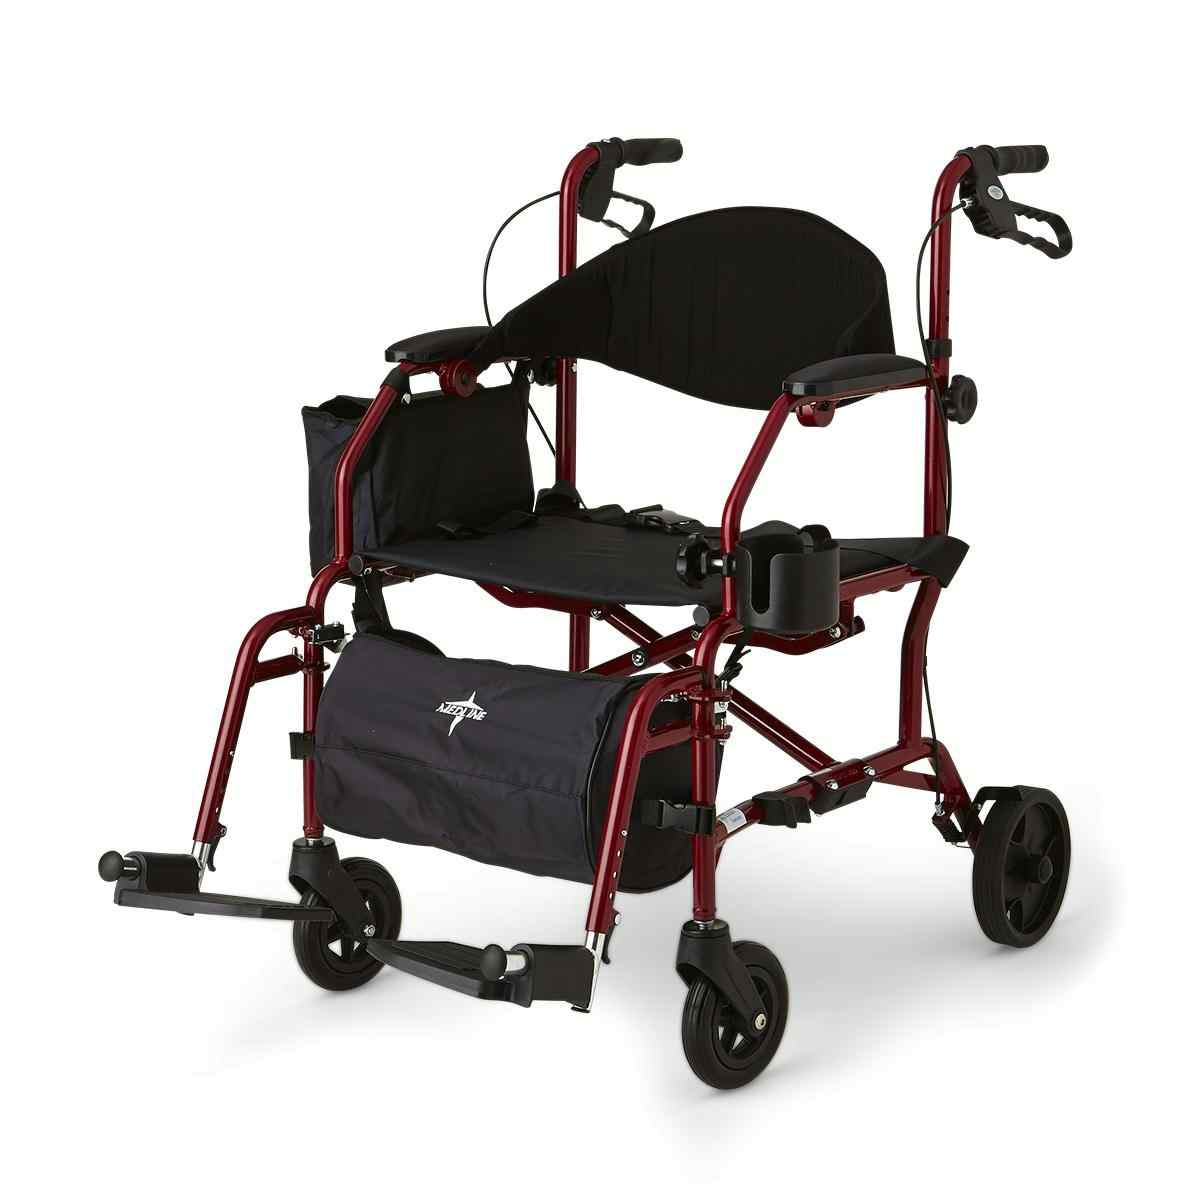 Medline Translator Combination Transport Chair and Rollator, Swing-Away Footrests, 8", MDS808200TRR, Red - 1 Each